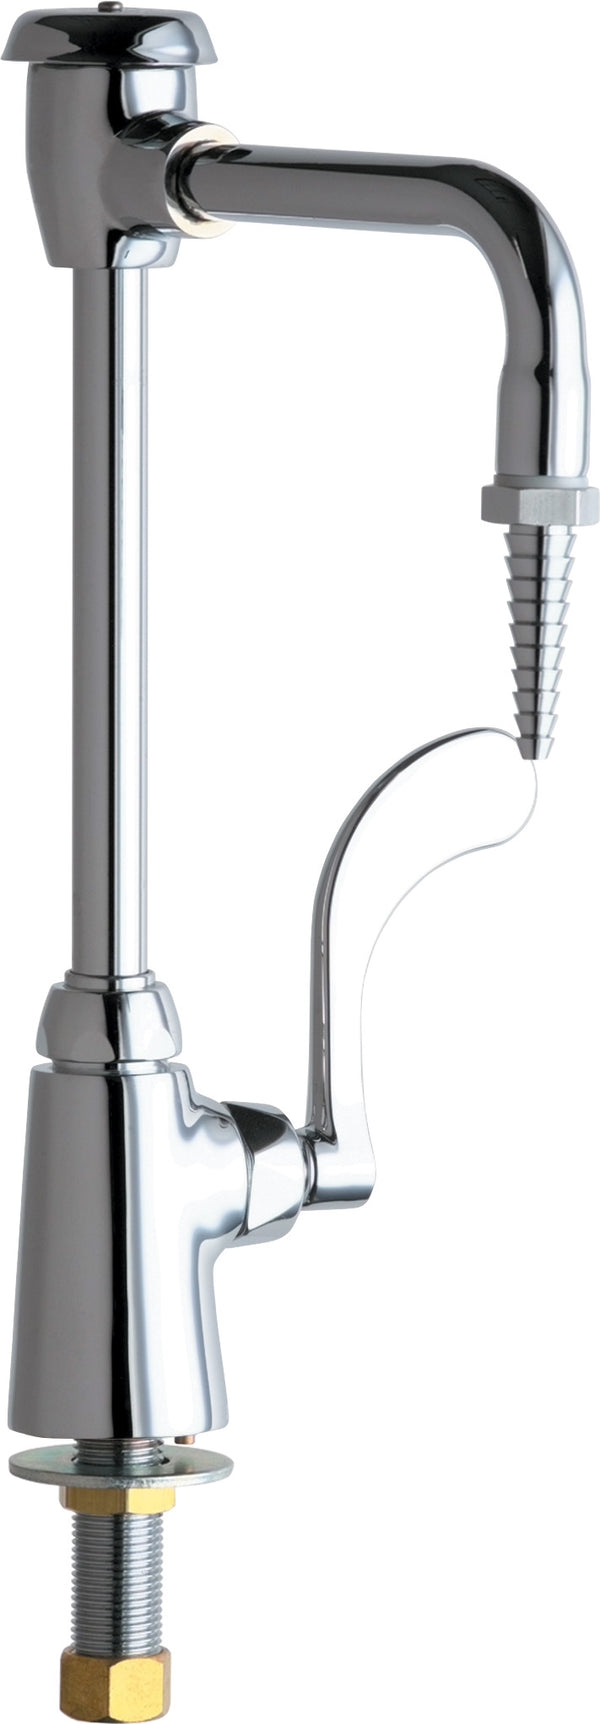 Chicago Faucets Laboratory Sink Faucet 928-VR317XKCP